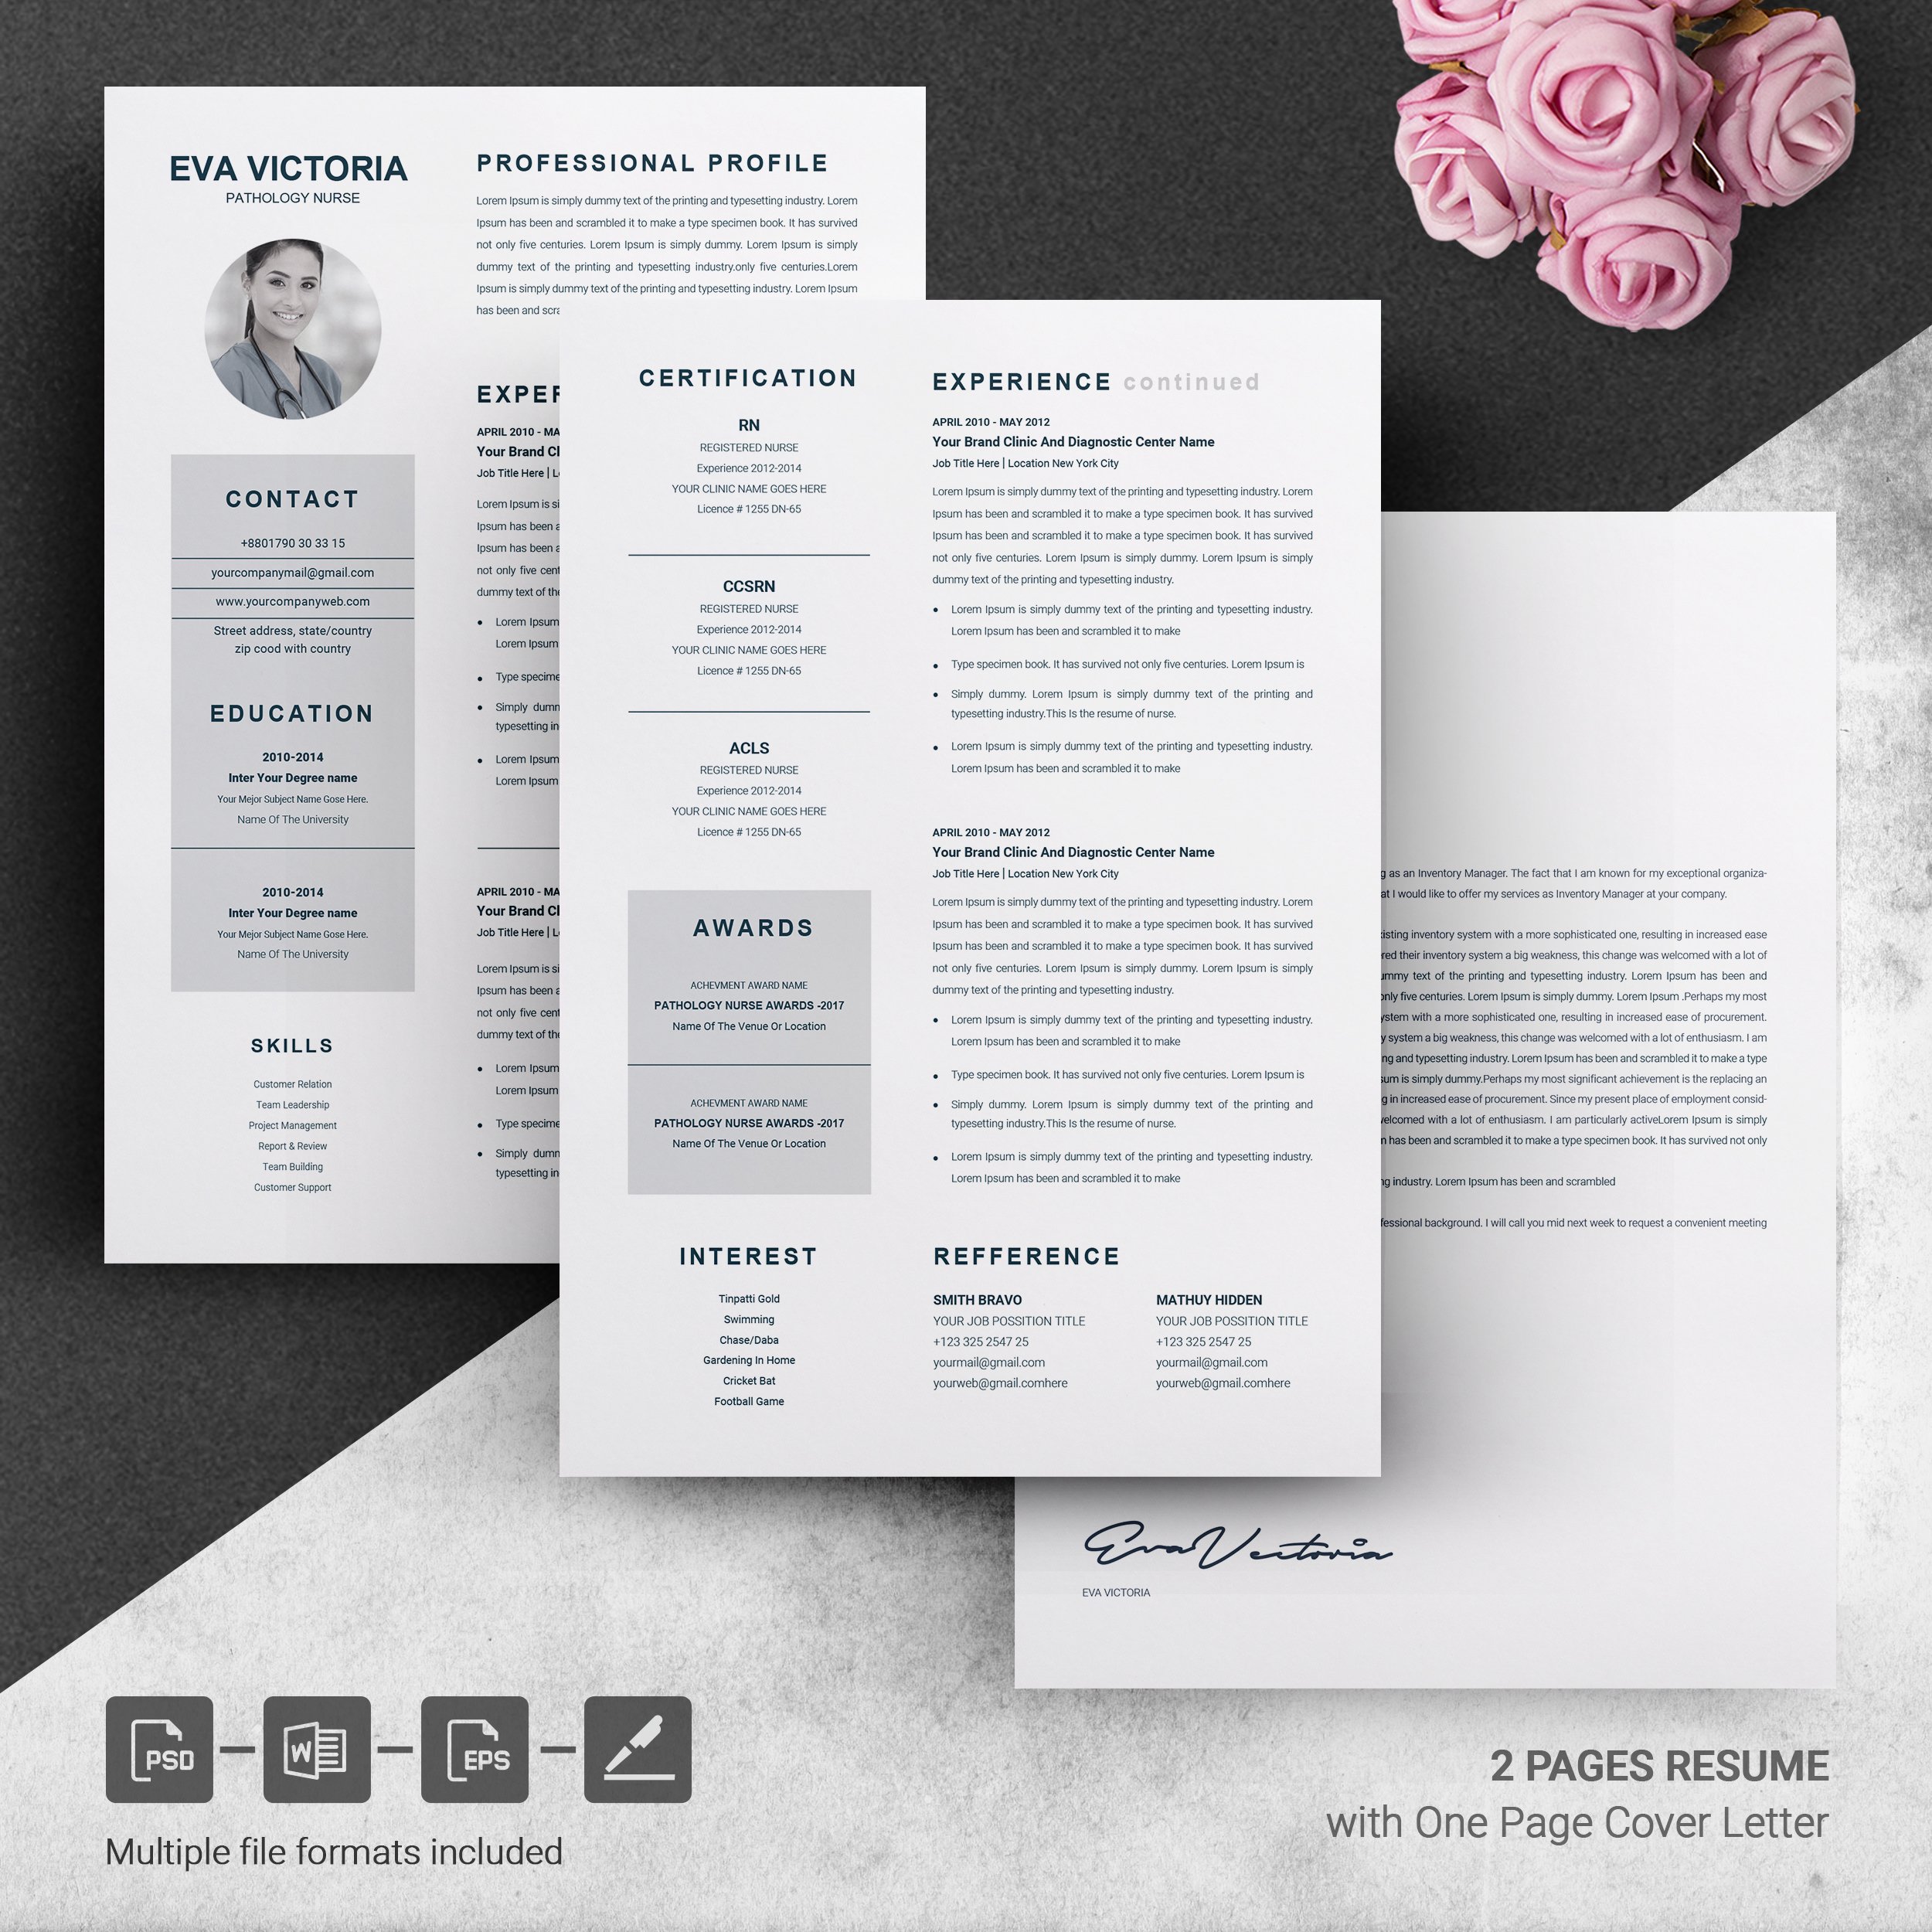 04 page free resume design template 297